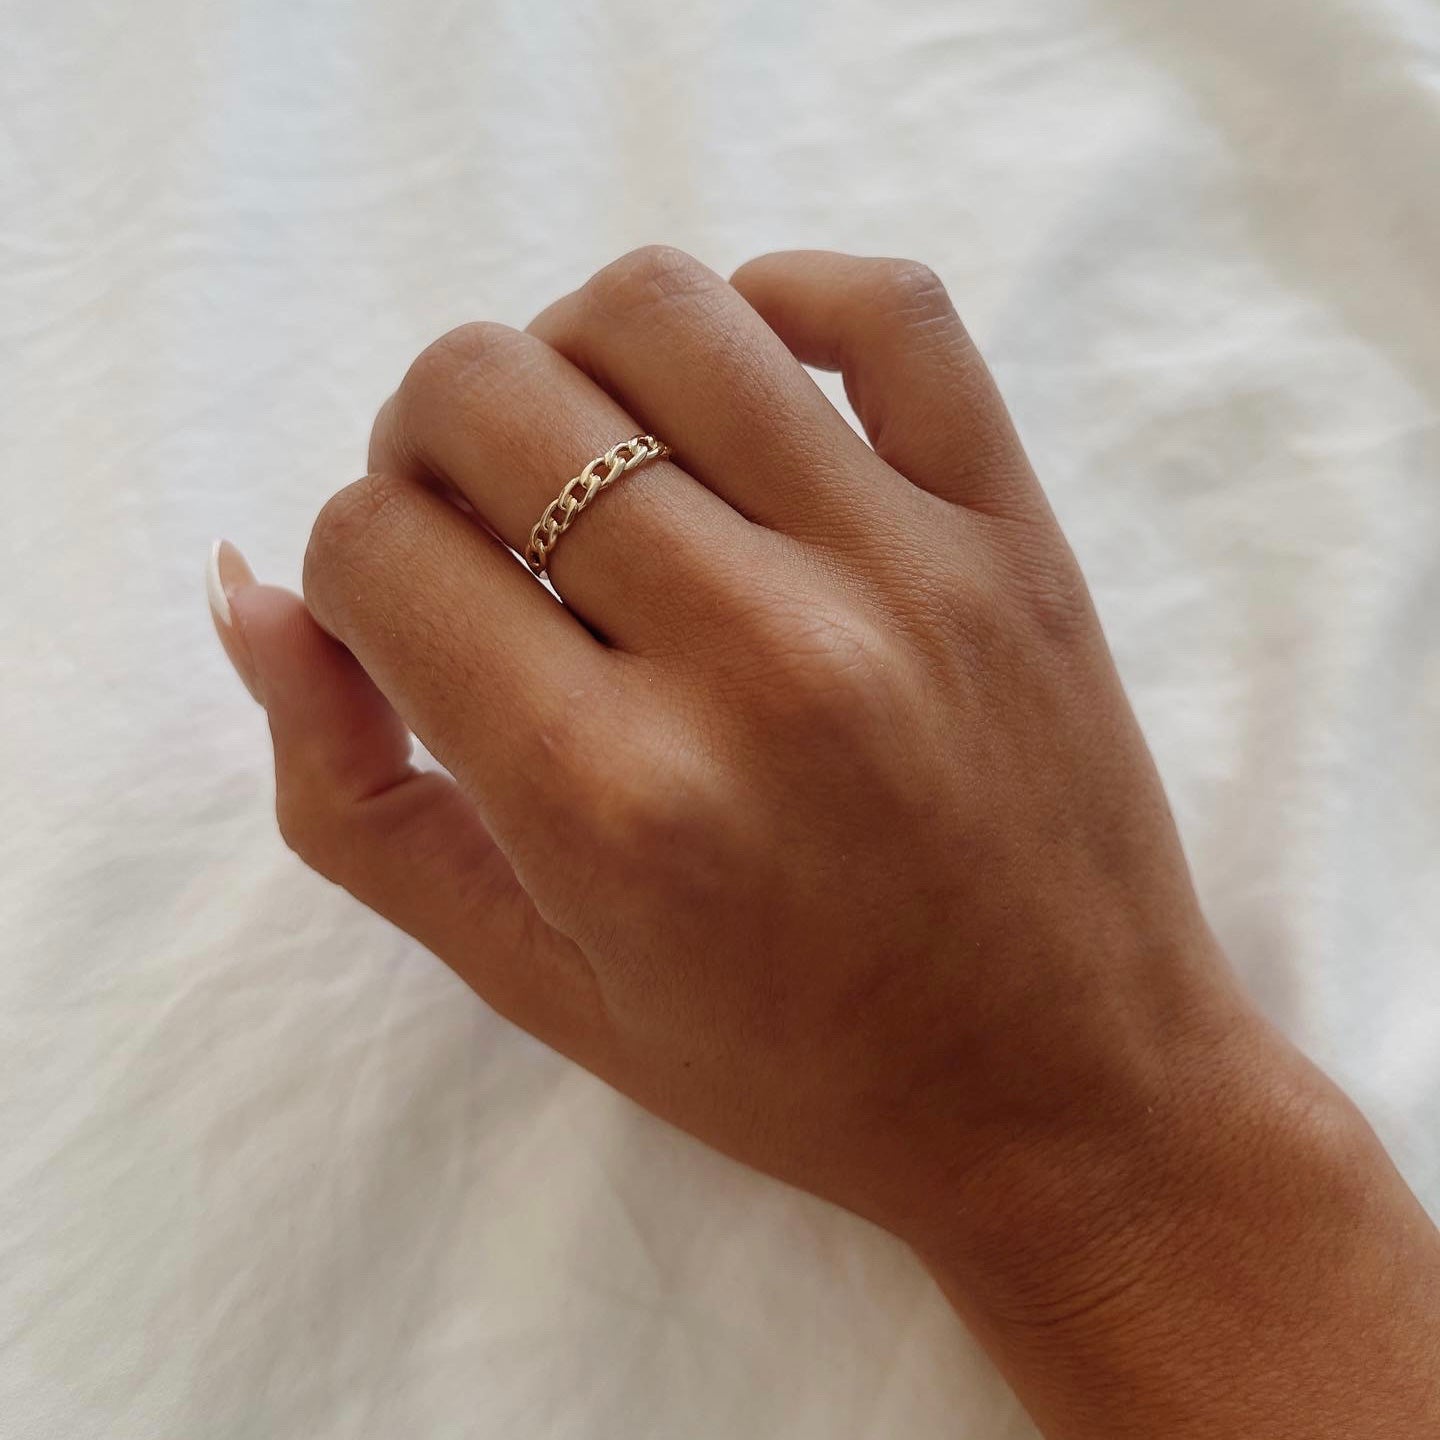 chain ring, curb chain ring, 14k chain ring, dainty 14k gold ring, solid gold dainty ring, 14k dainty gold chain ring, cuban link dainty ring, stackable rings, real gold jewelry